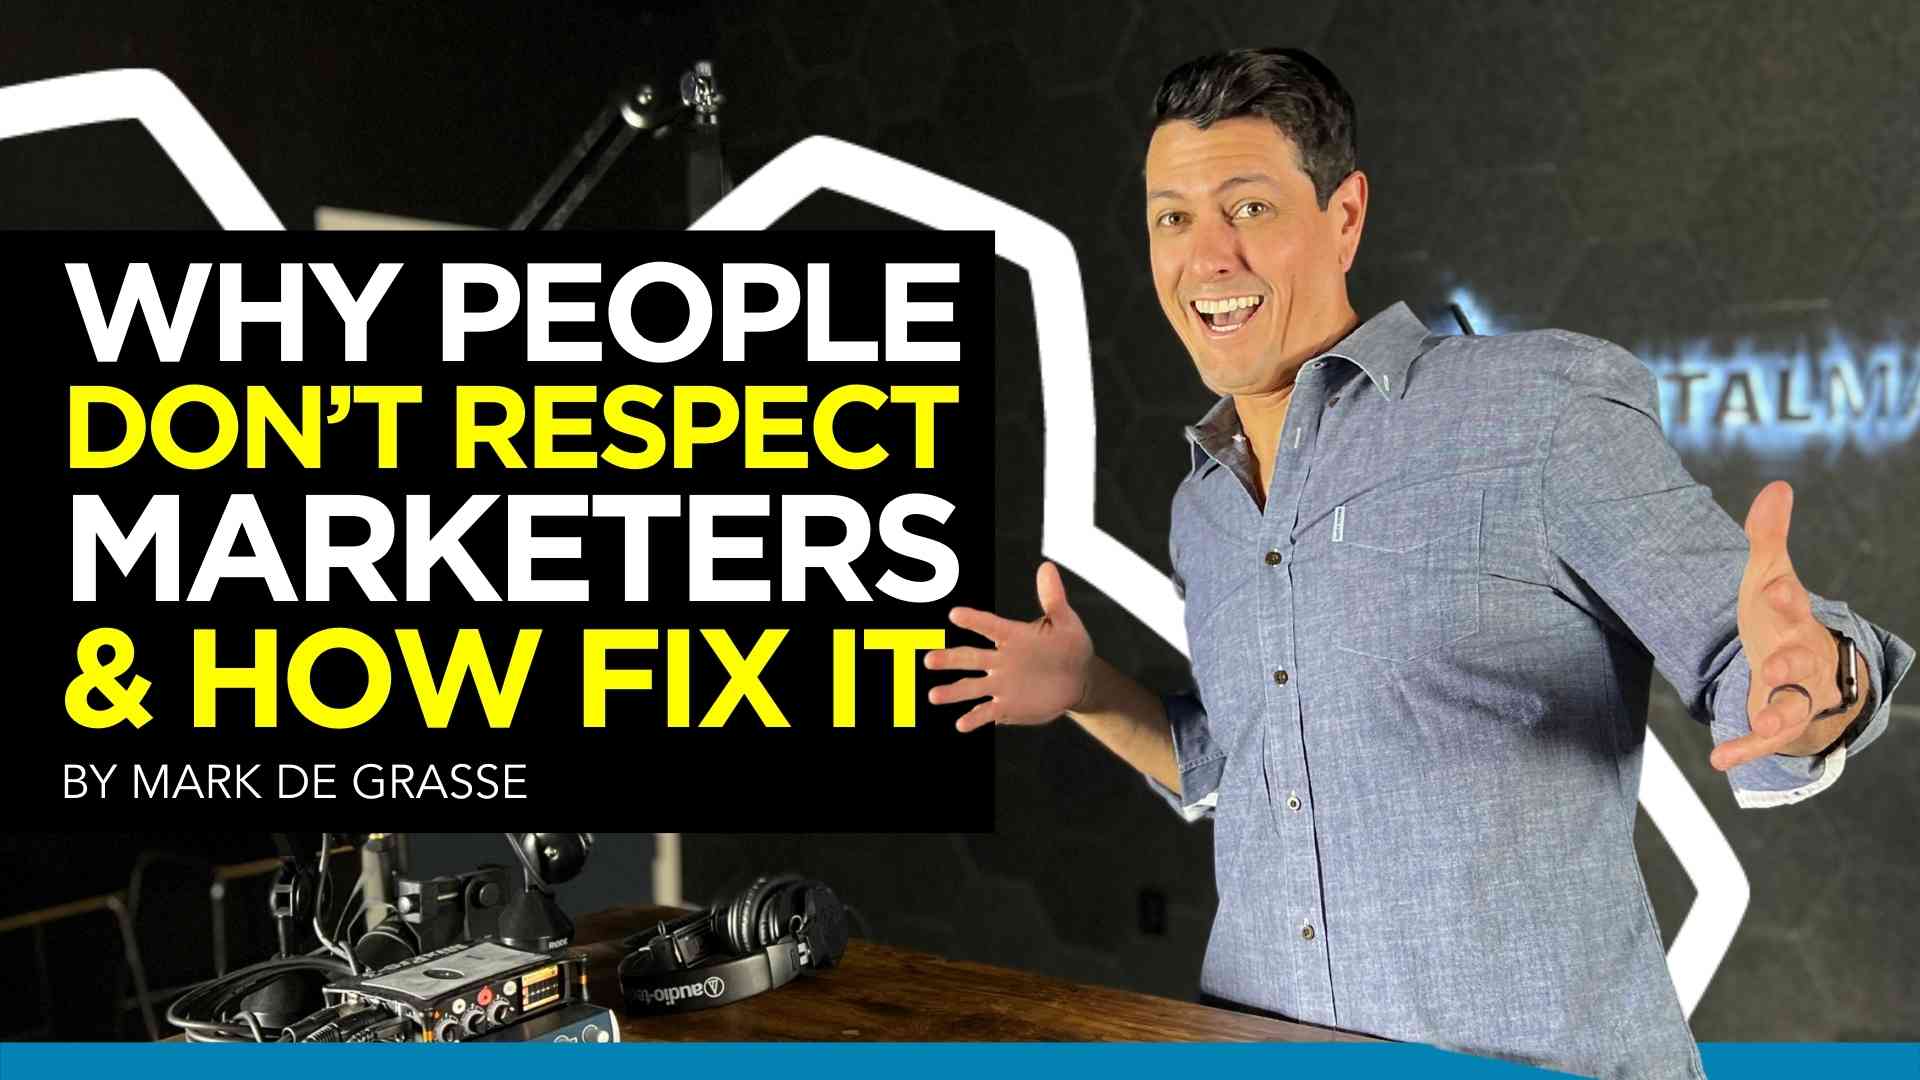 Why People Don’t Respect Marketers & How to Elevate the Marketing Profession